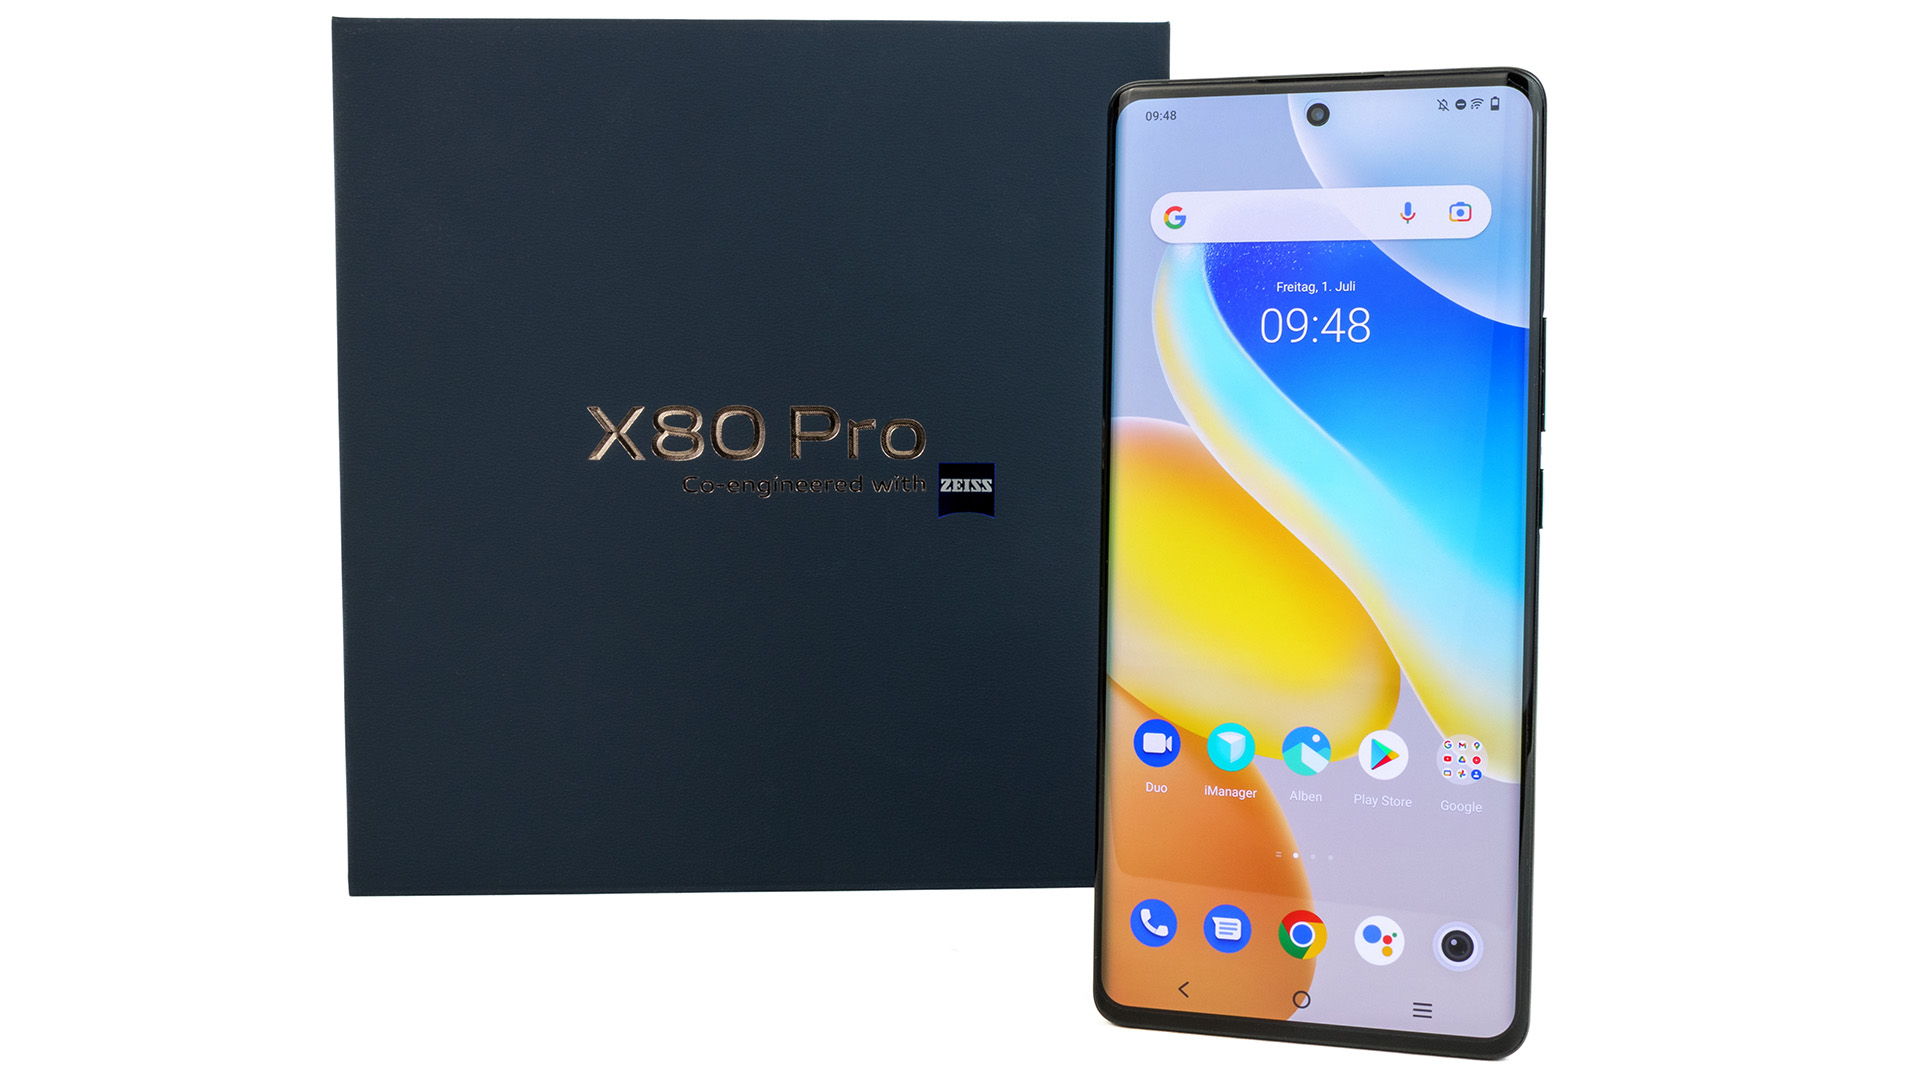 Vivo X80 Pro smartphone review: Primus camera with huge